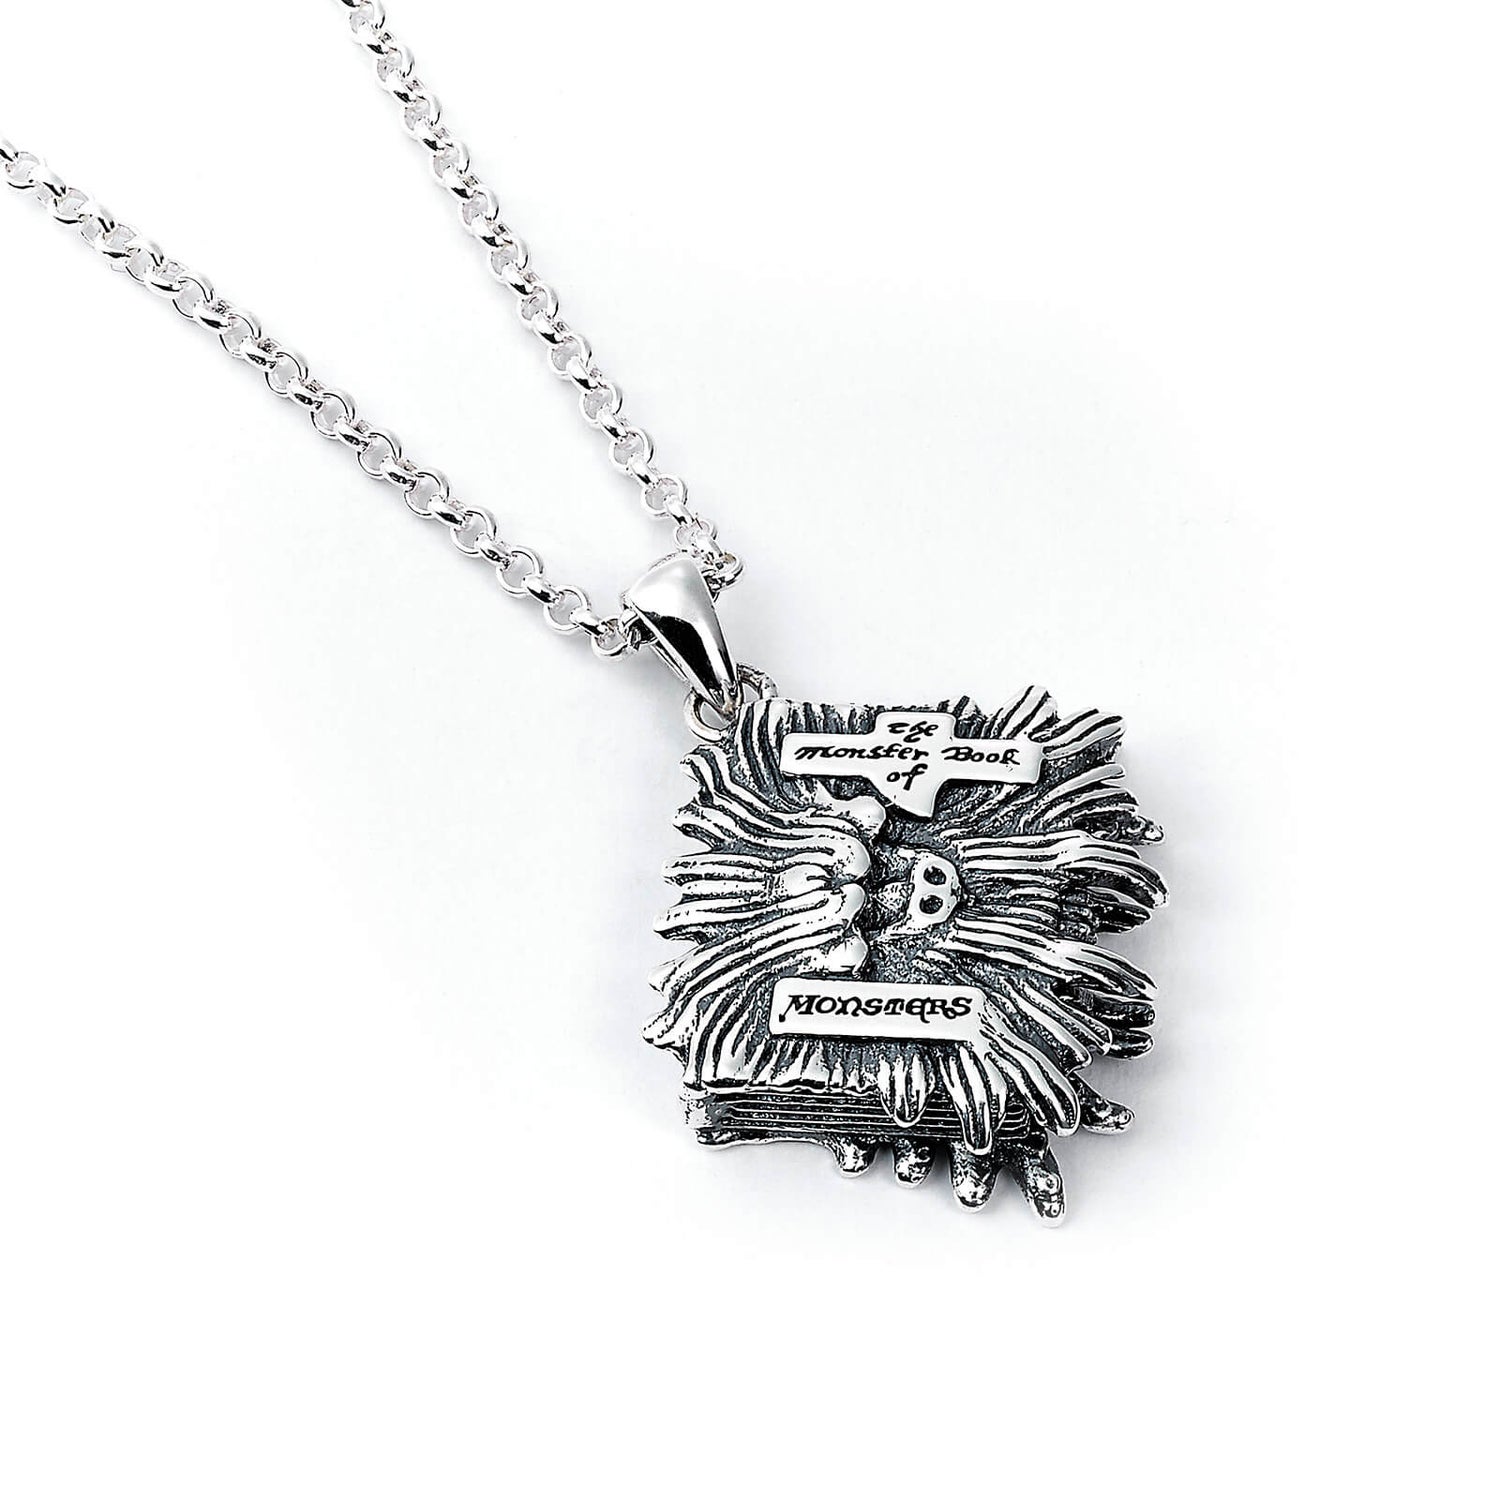 Harry Potter Monster Book Charm Necklace - Silver